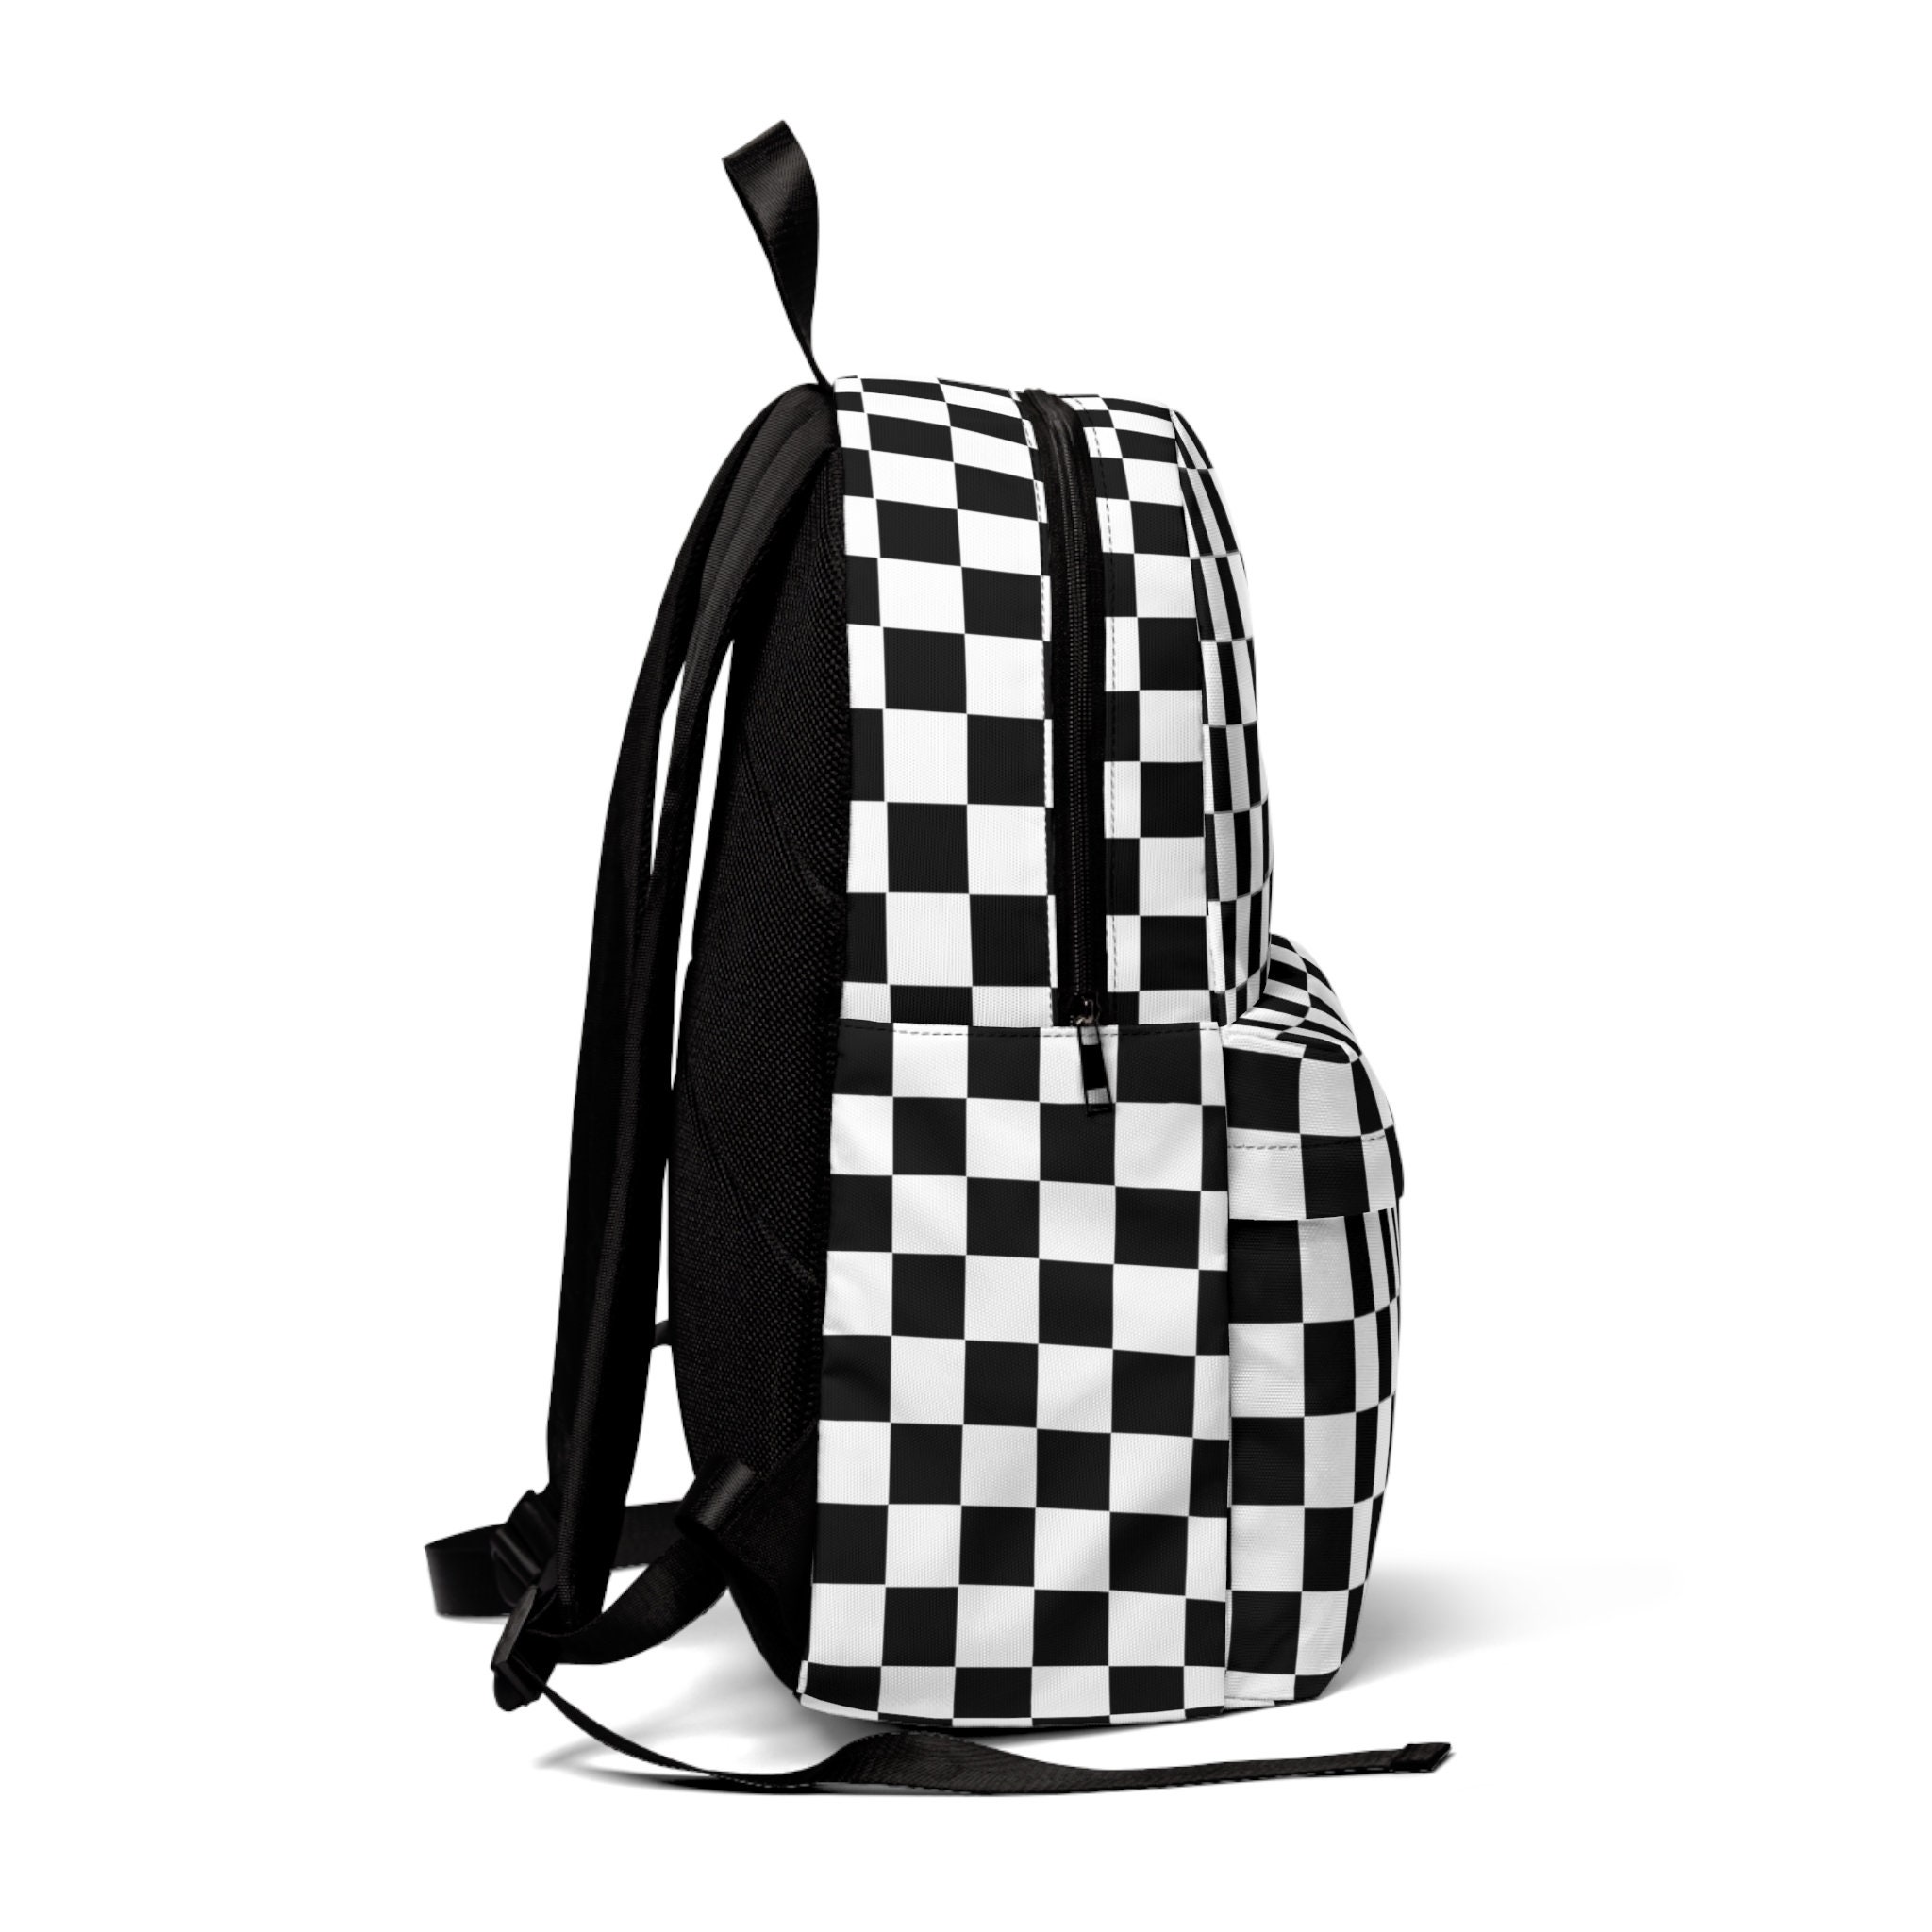 White Checkered Backpack Purse